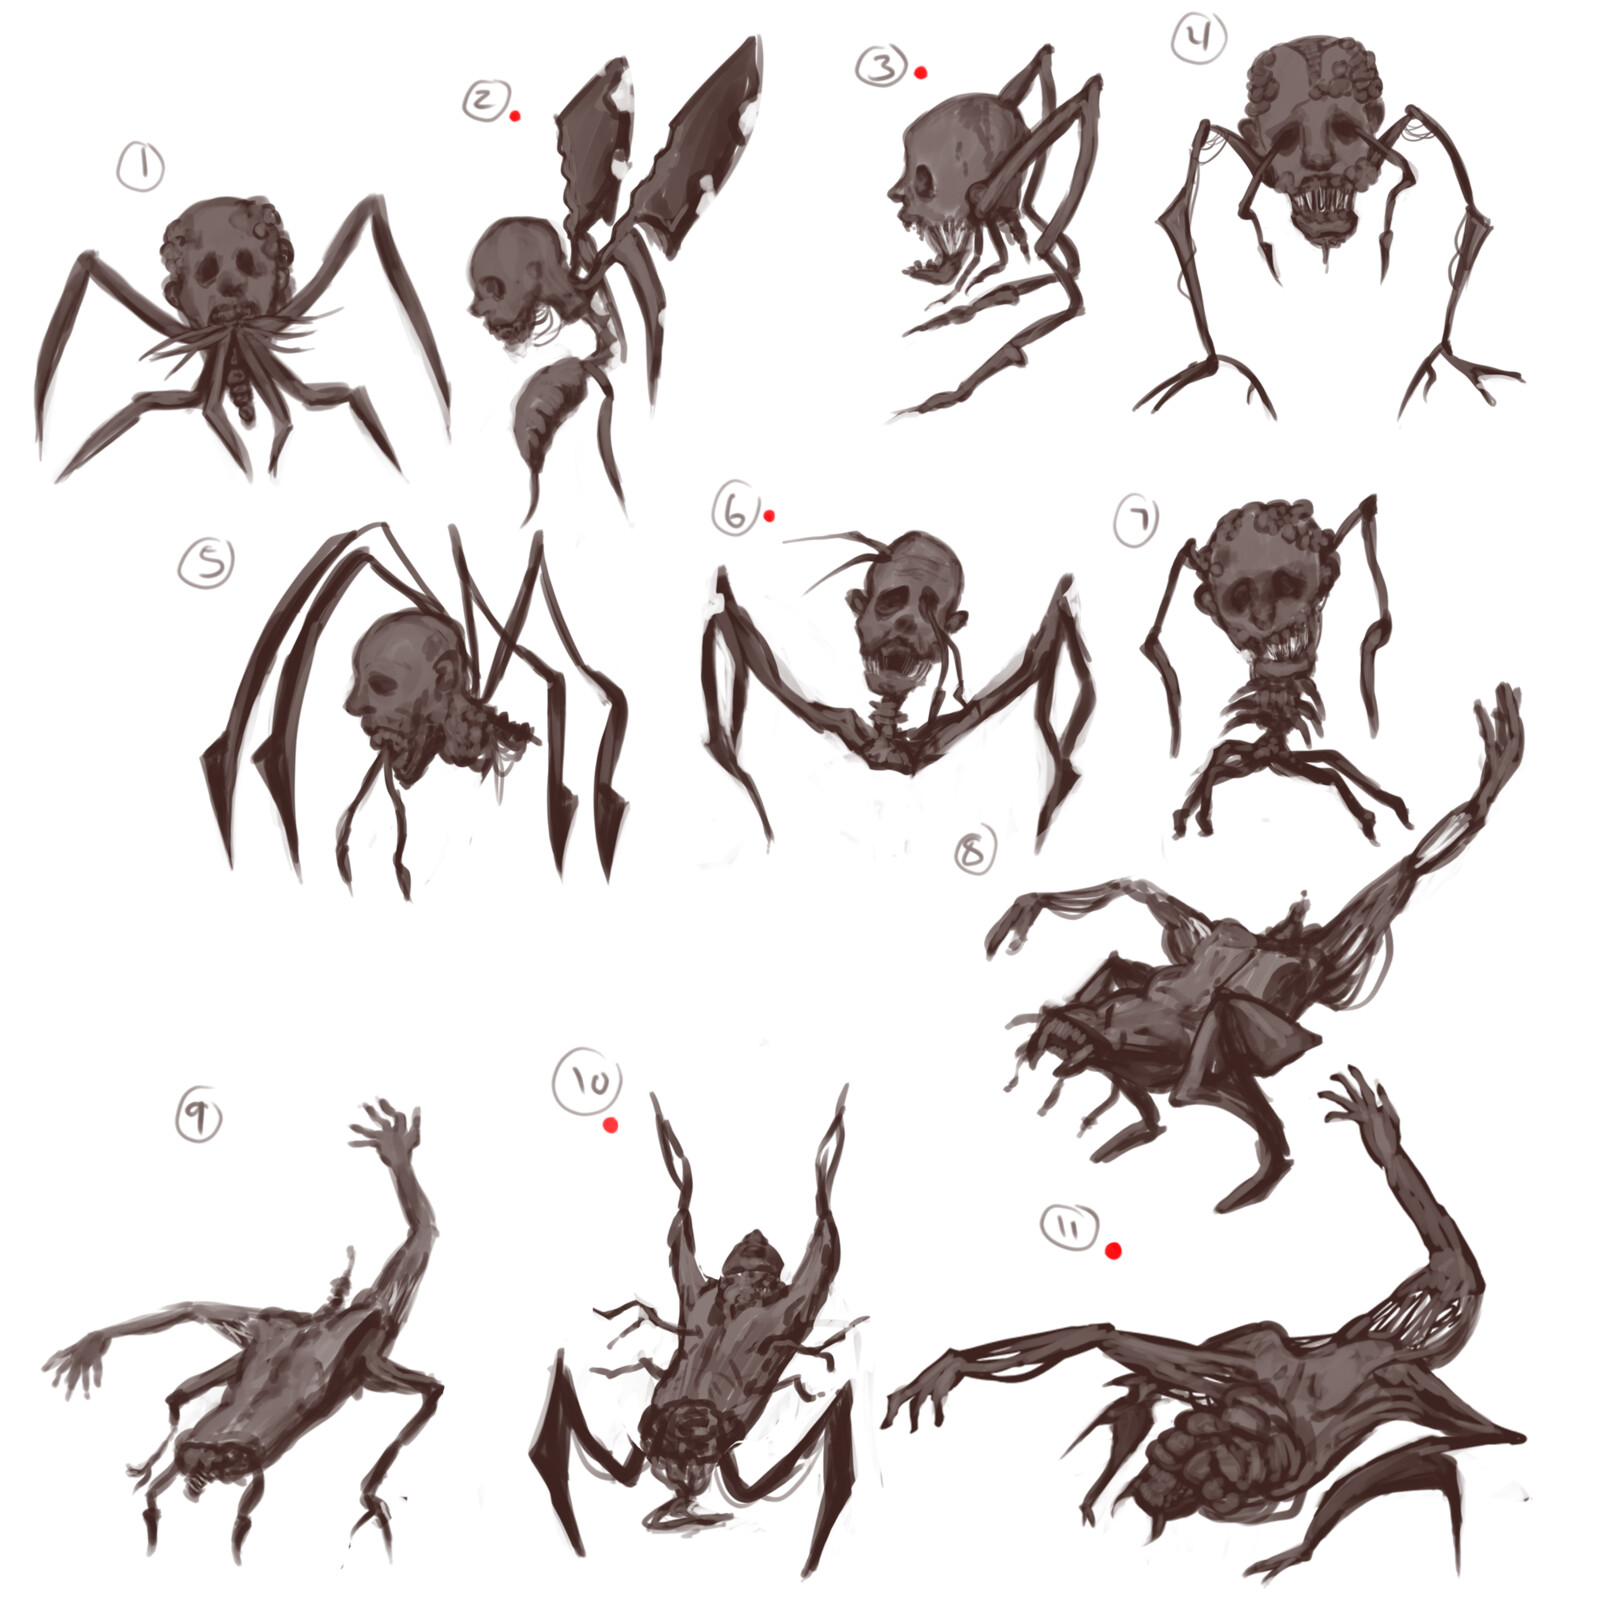 First sketches from thumbnails 